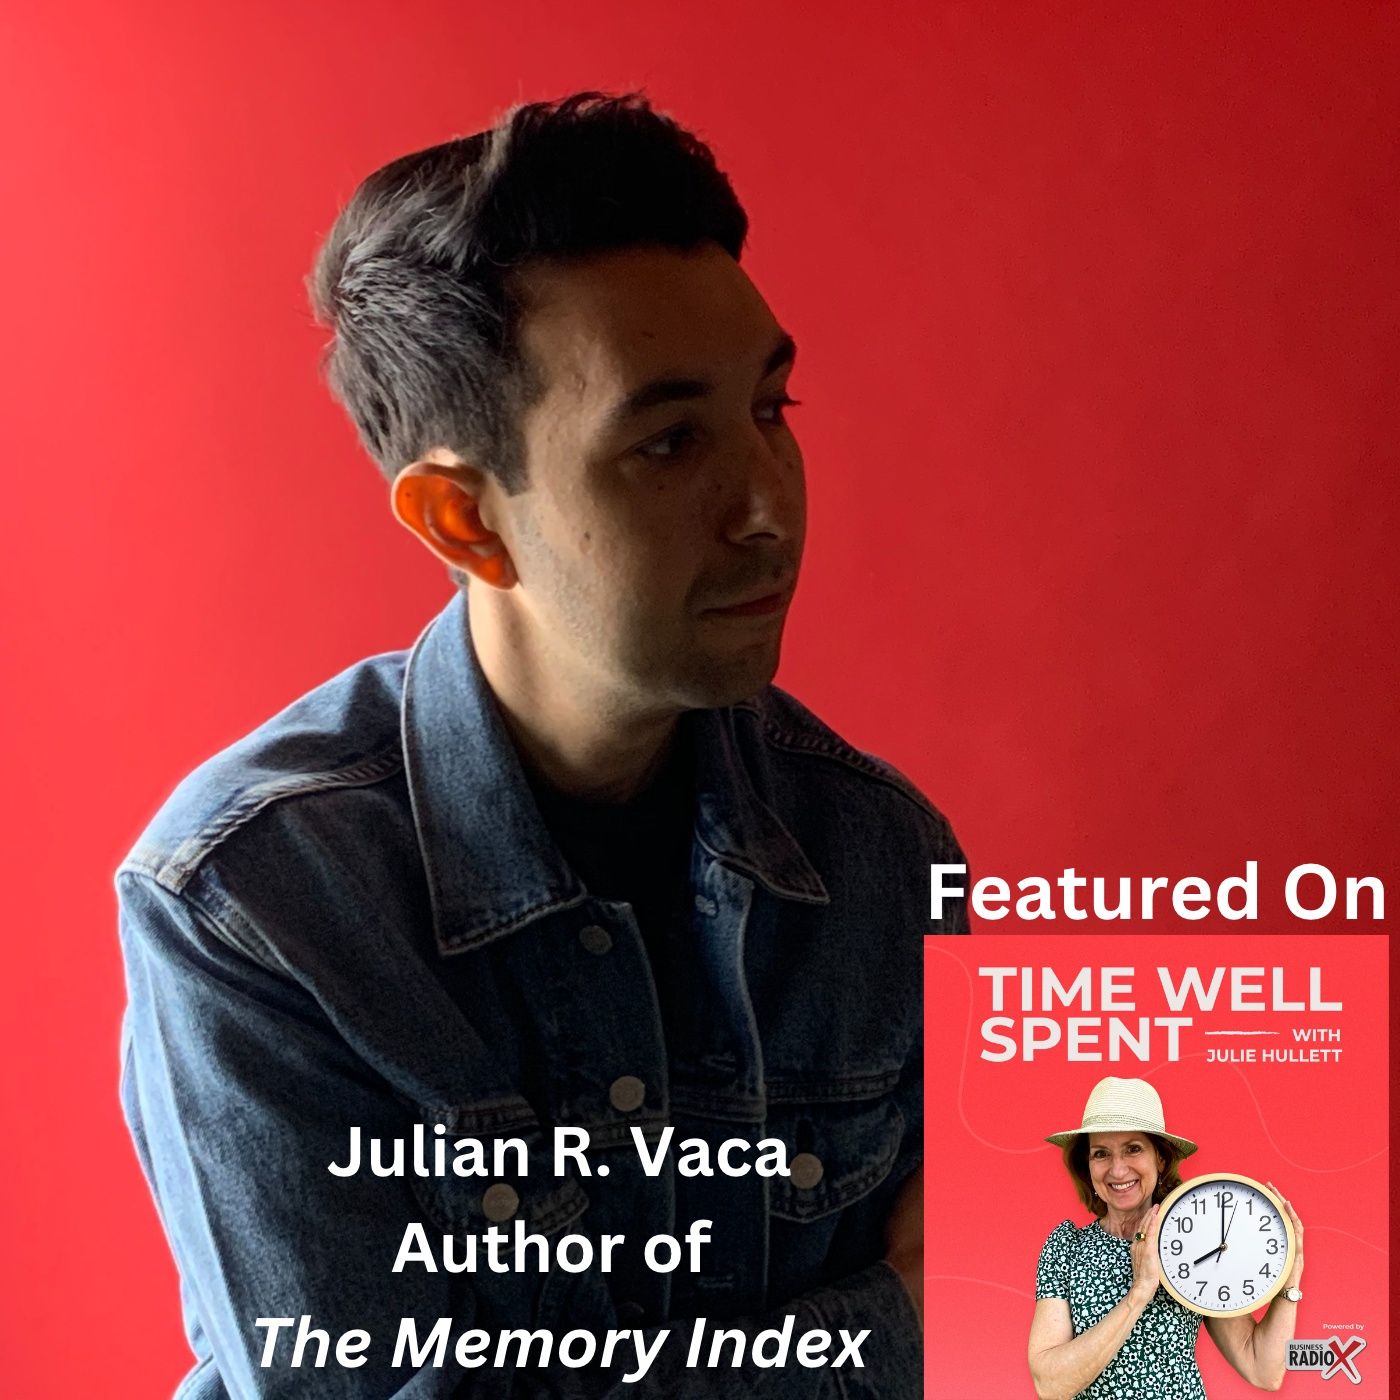 Julian R. Vaca, Author of The Memory Index